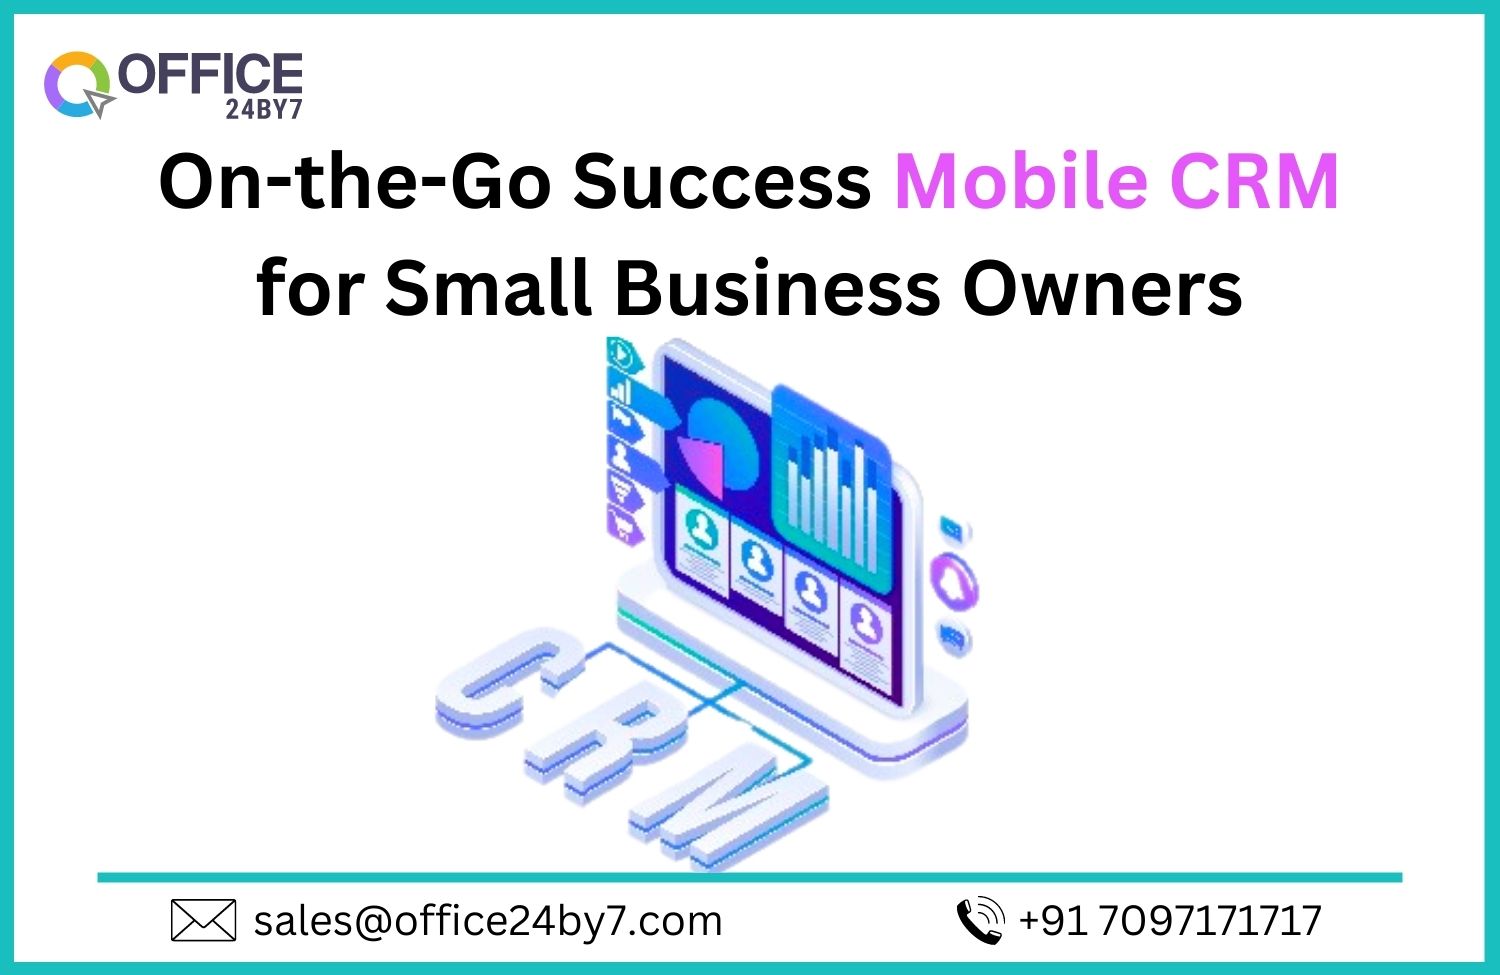 On-the-Go Success Mobile CRM for Small Business Owners